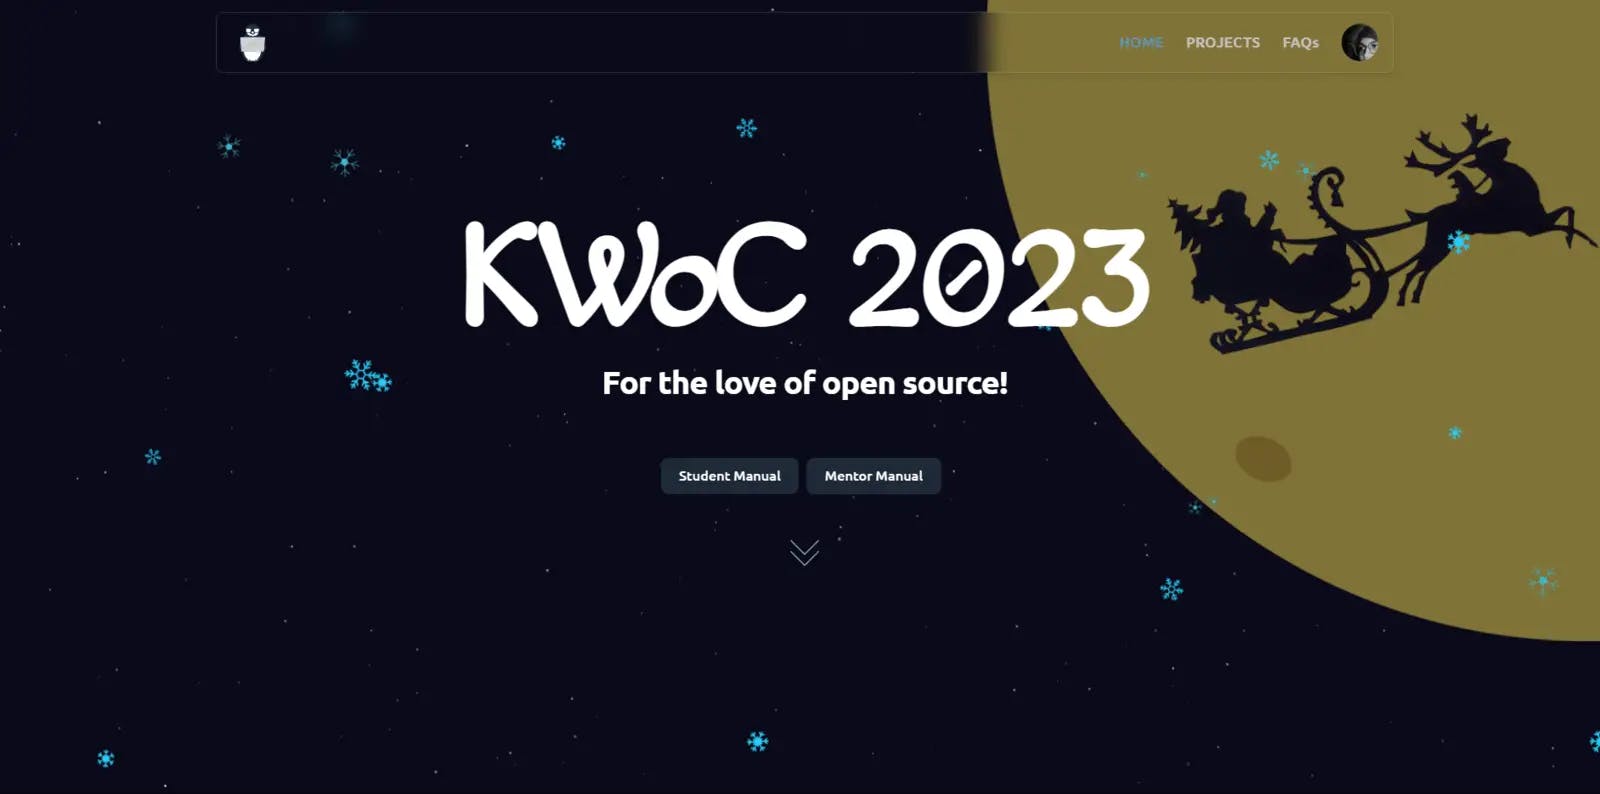 Discover how I conquered the coding challenge at KWoC 2023 Adventure - now it's your turn